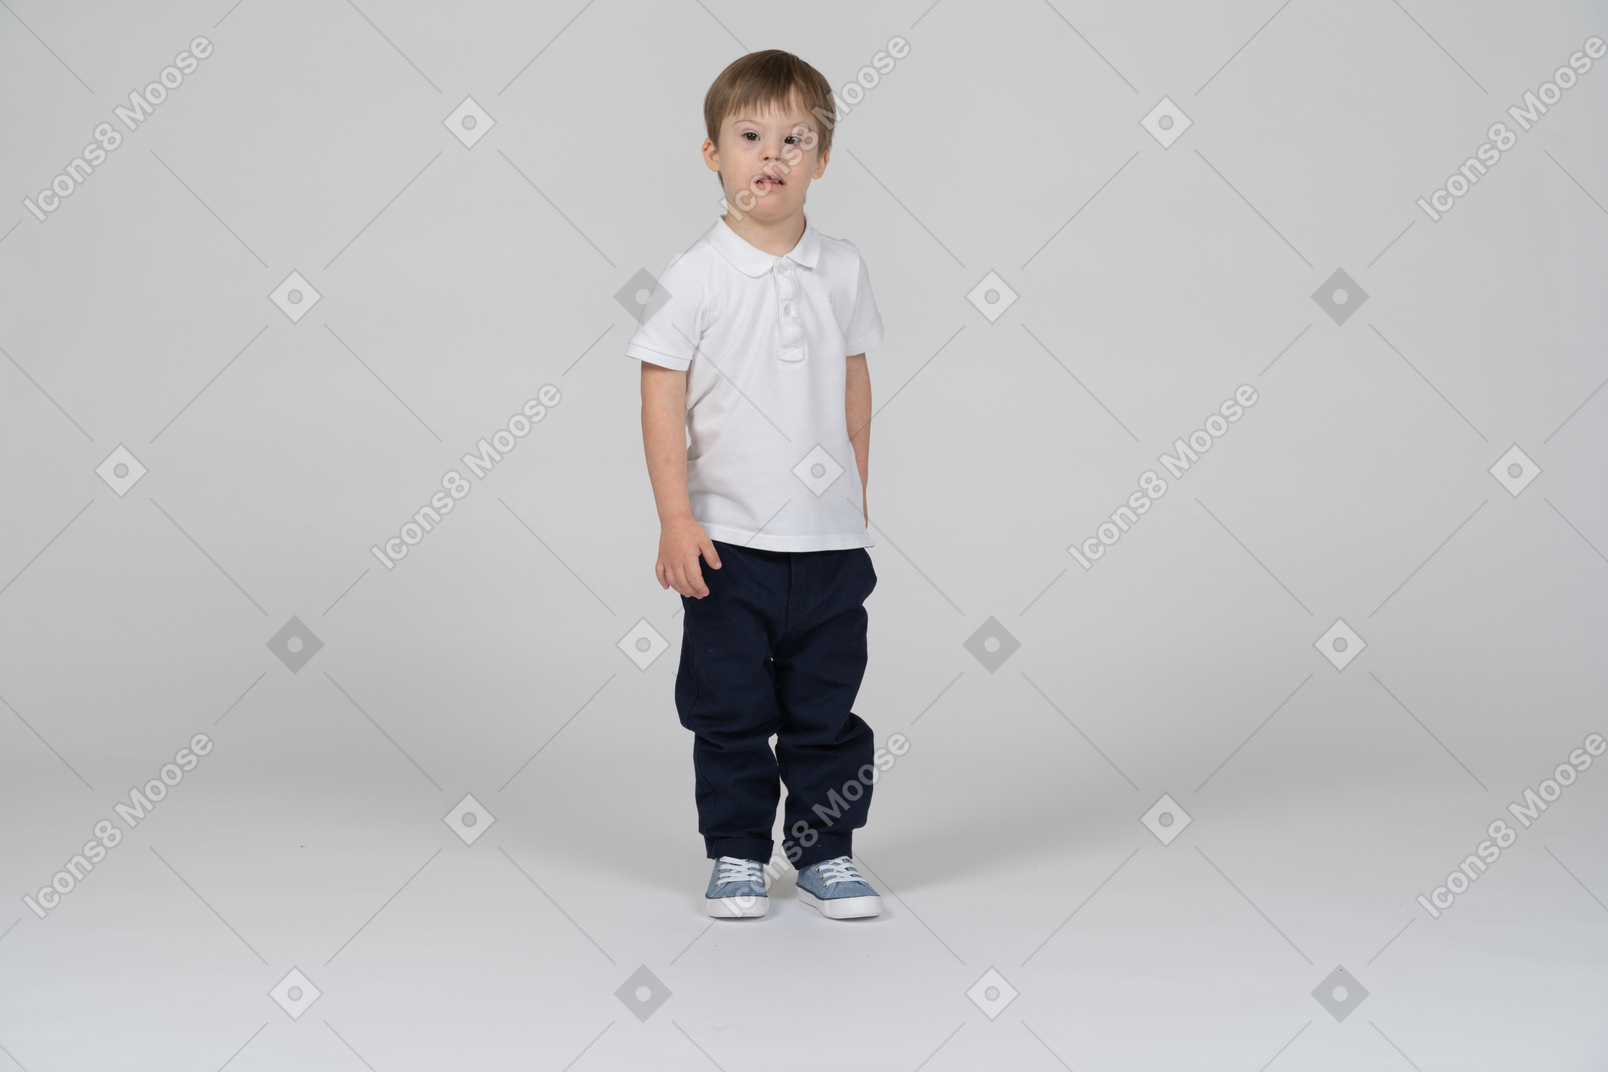 Front view of little boy standing upright